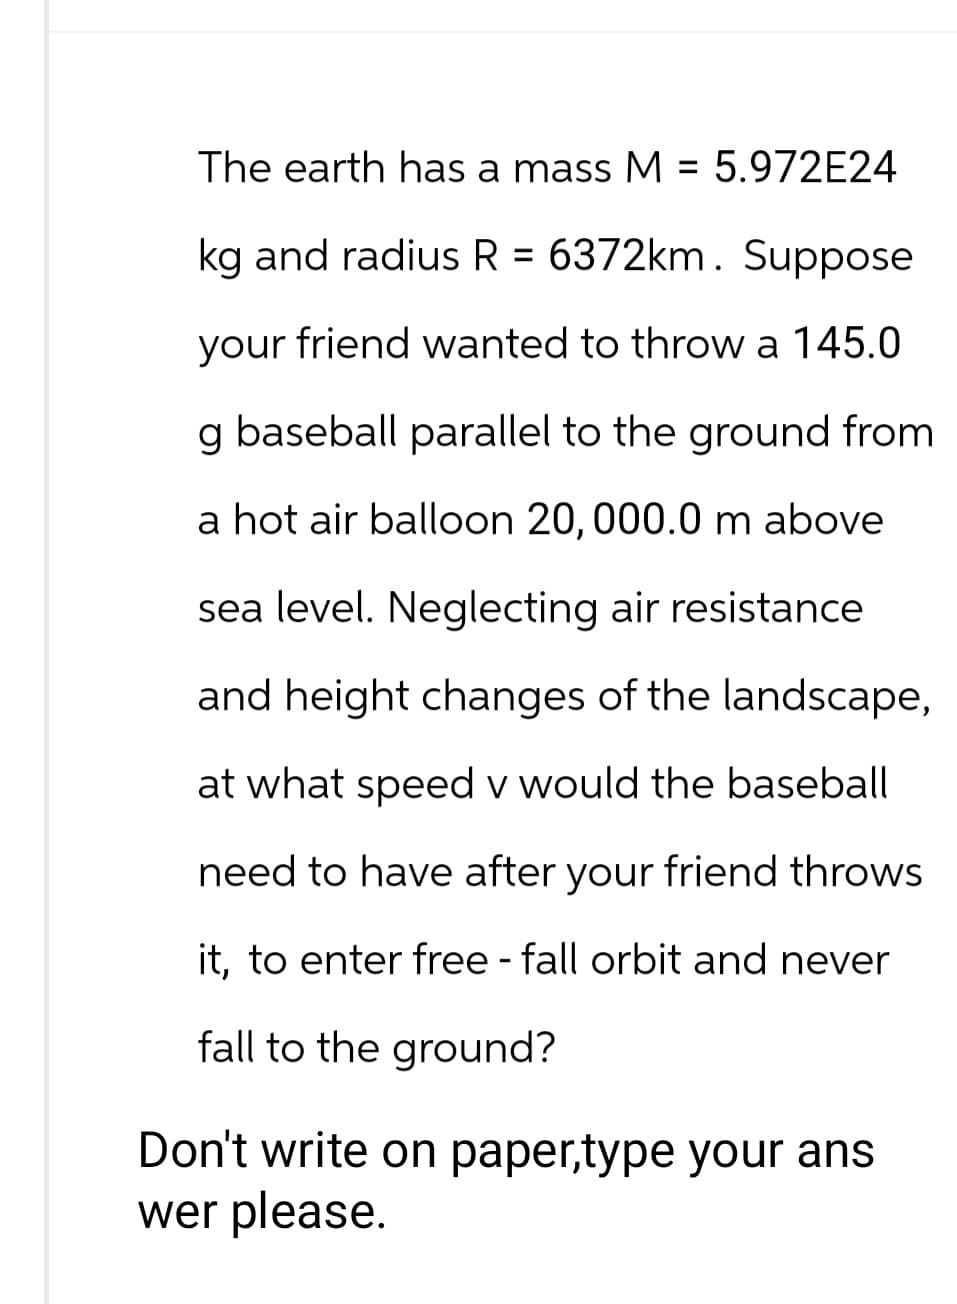 The earth has a mass M = 5.972E24
kg and radius R = 6372km. Suppose
your friend wanted to throw a 145.0
g baseball parallel to the ground from
a hot air balloon 20, 000.0 m above
sea level. Neglecting air resistance
and height changes of the landscape,
at what speed v would the baseball
need to have after your friend throws
it, to enter free - fall orbit and never
fall to the ground?
Don't write on paper,type your ans
wer please.